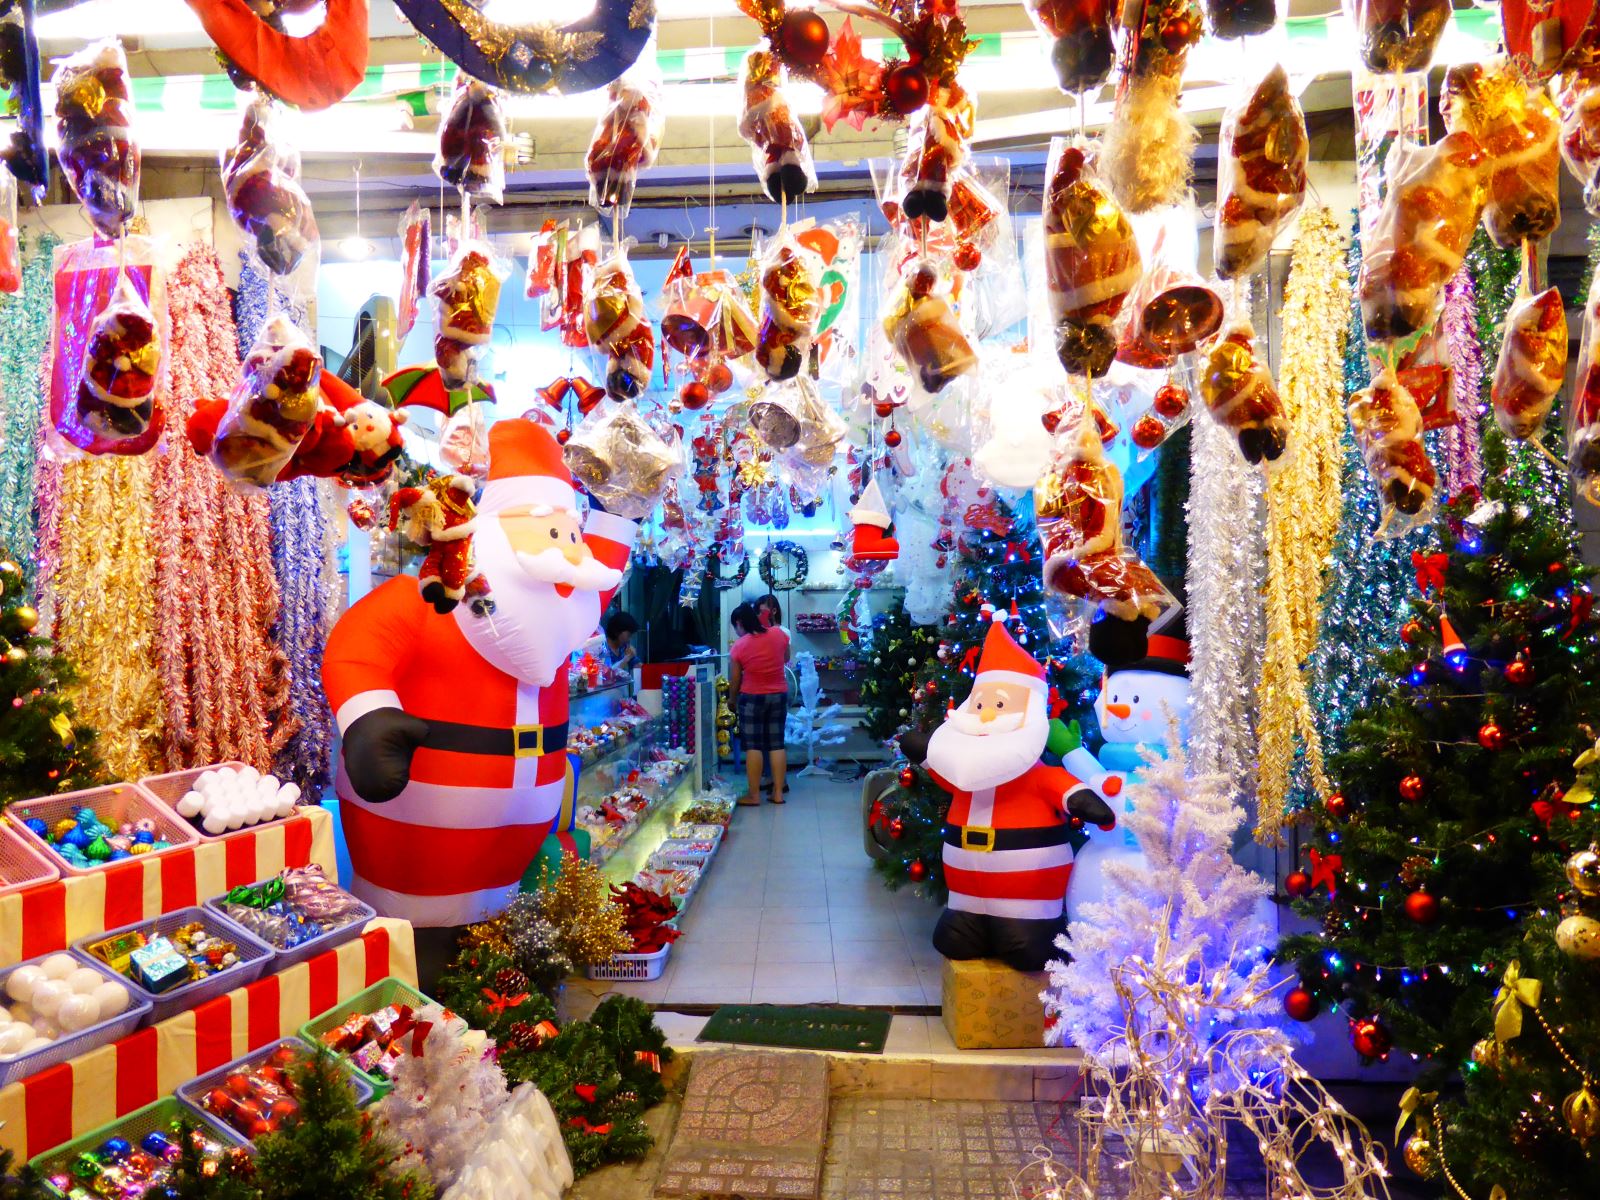 Things to do at Christmas in Vietnam